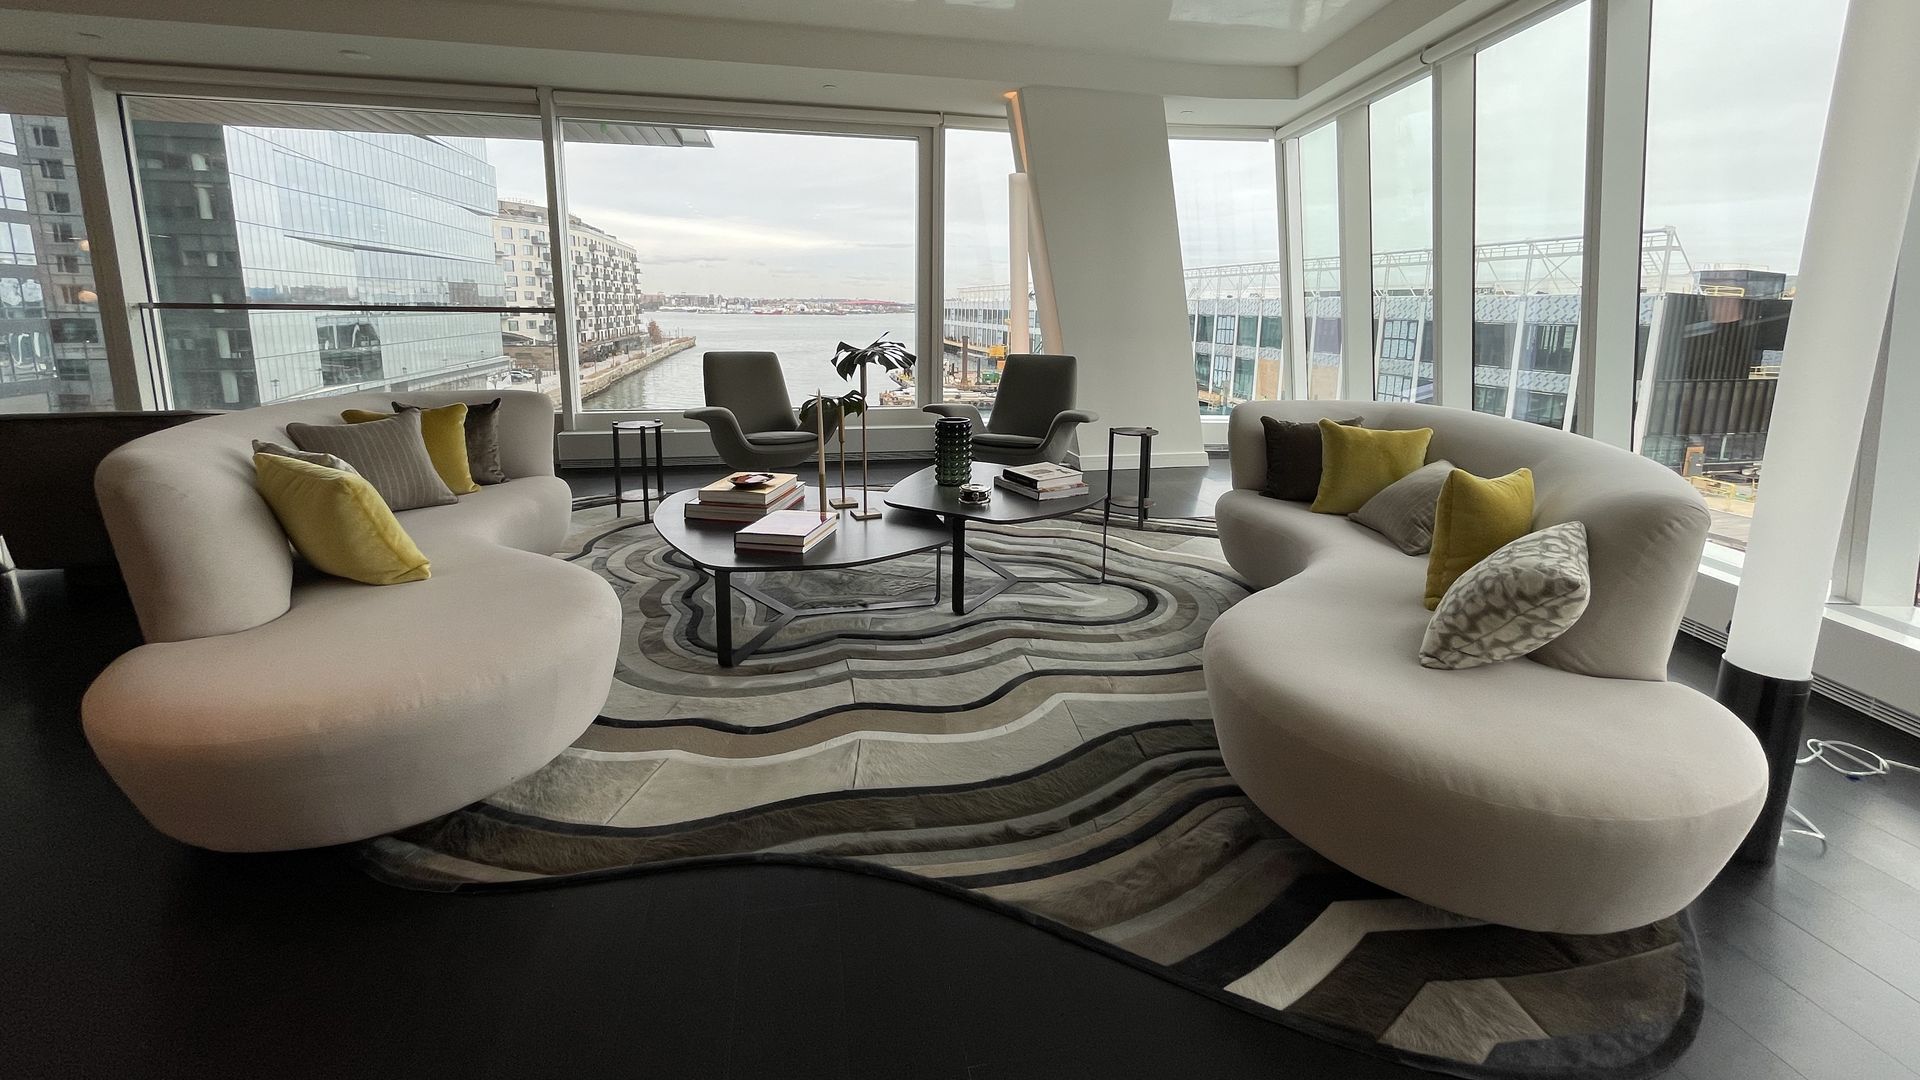 The view inside the St. Regis luxury condos, particularly the living room with waterfront views in a 3-bedroom, 3.5-bath unit.